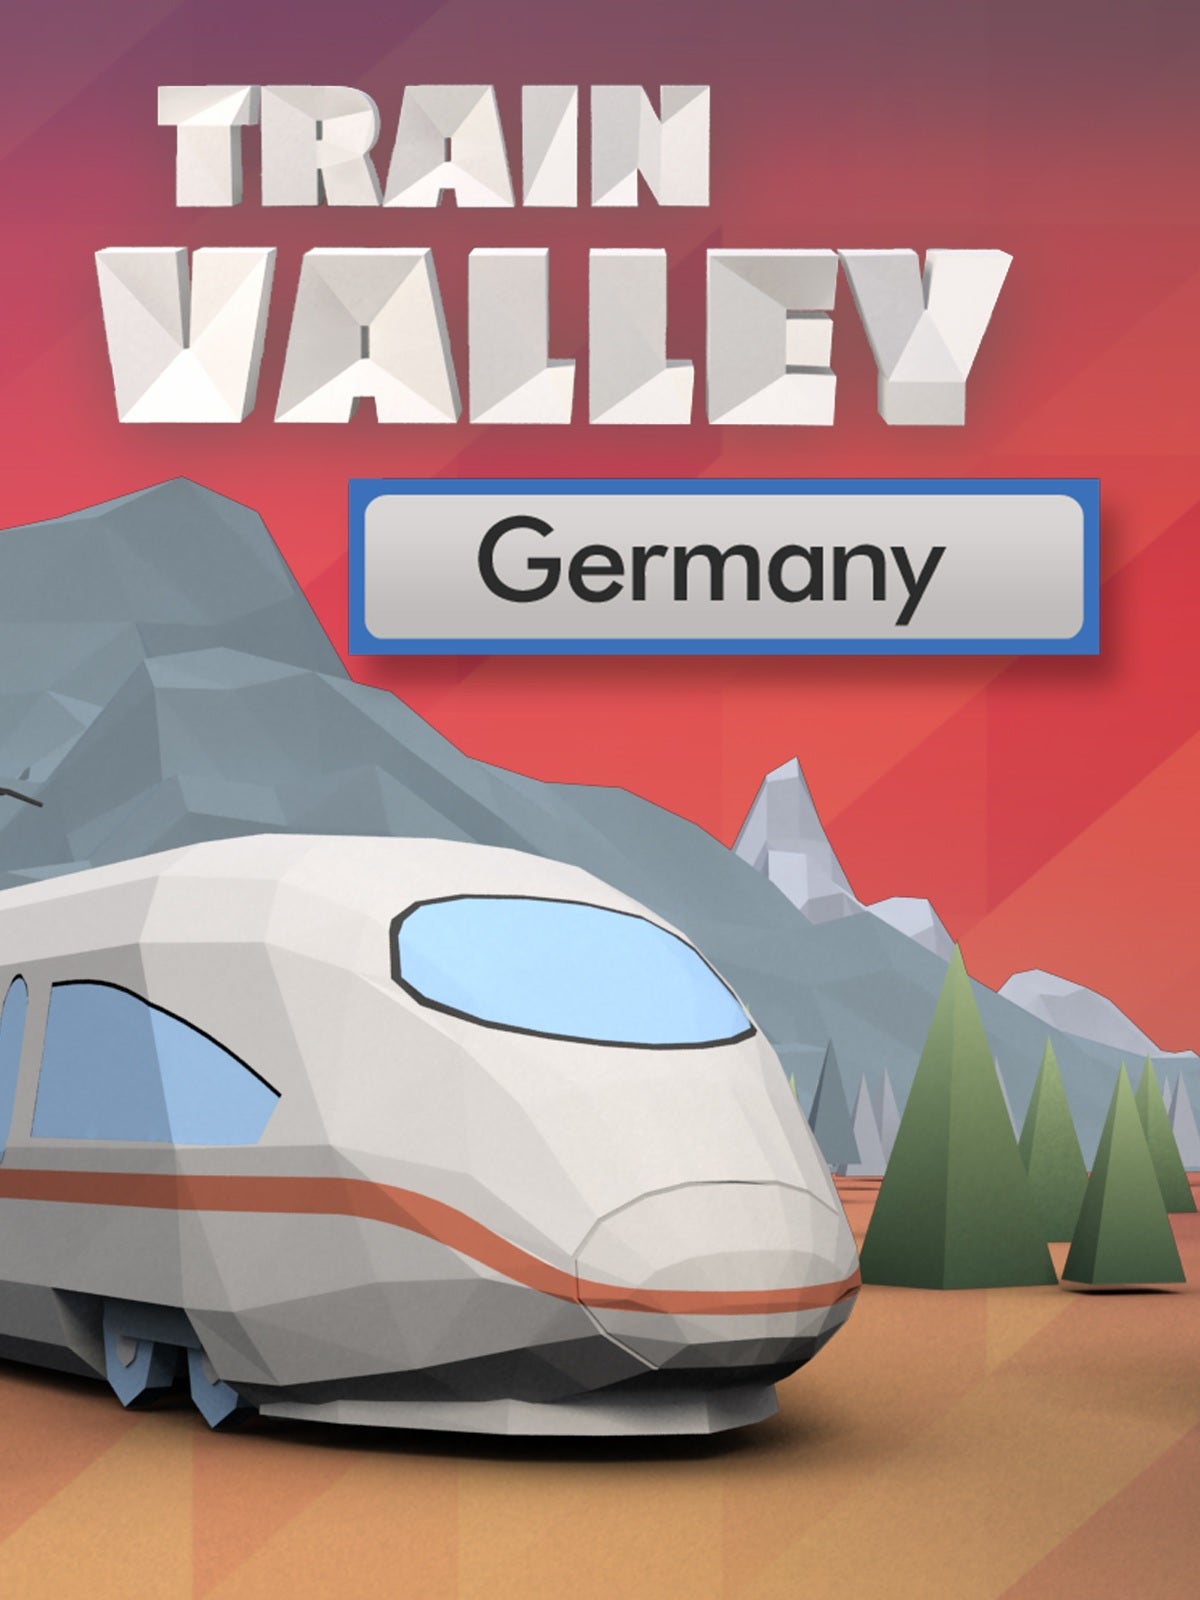 Flazm Train Valley Germany PC Game